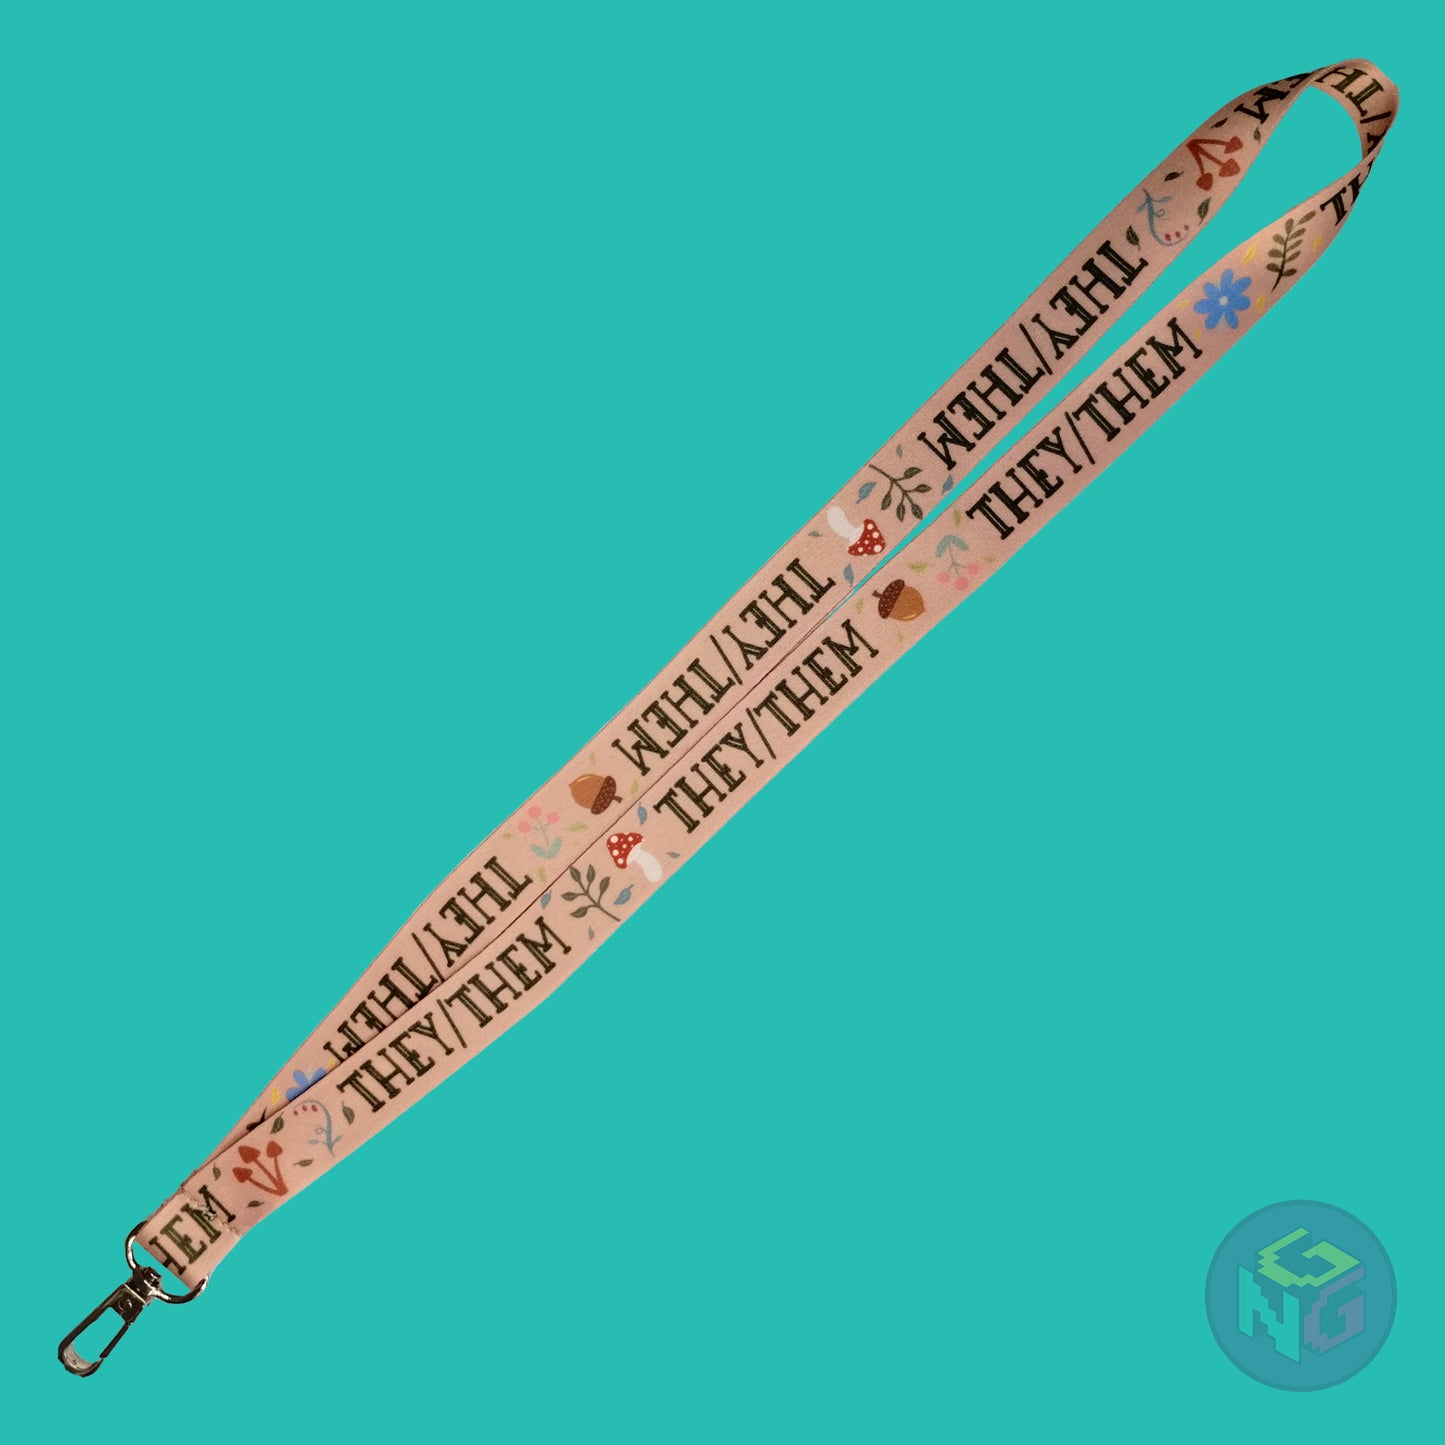 the tan they them cottagecore lanyard lying flat showing the complete design and repeating pattern of acorns, berries, mushrooms, leaves, and they them pronouns